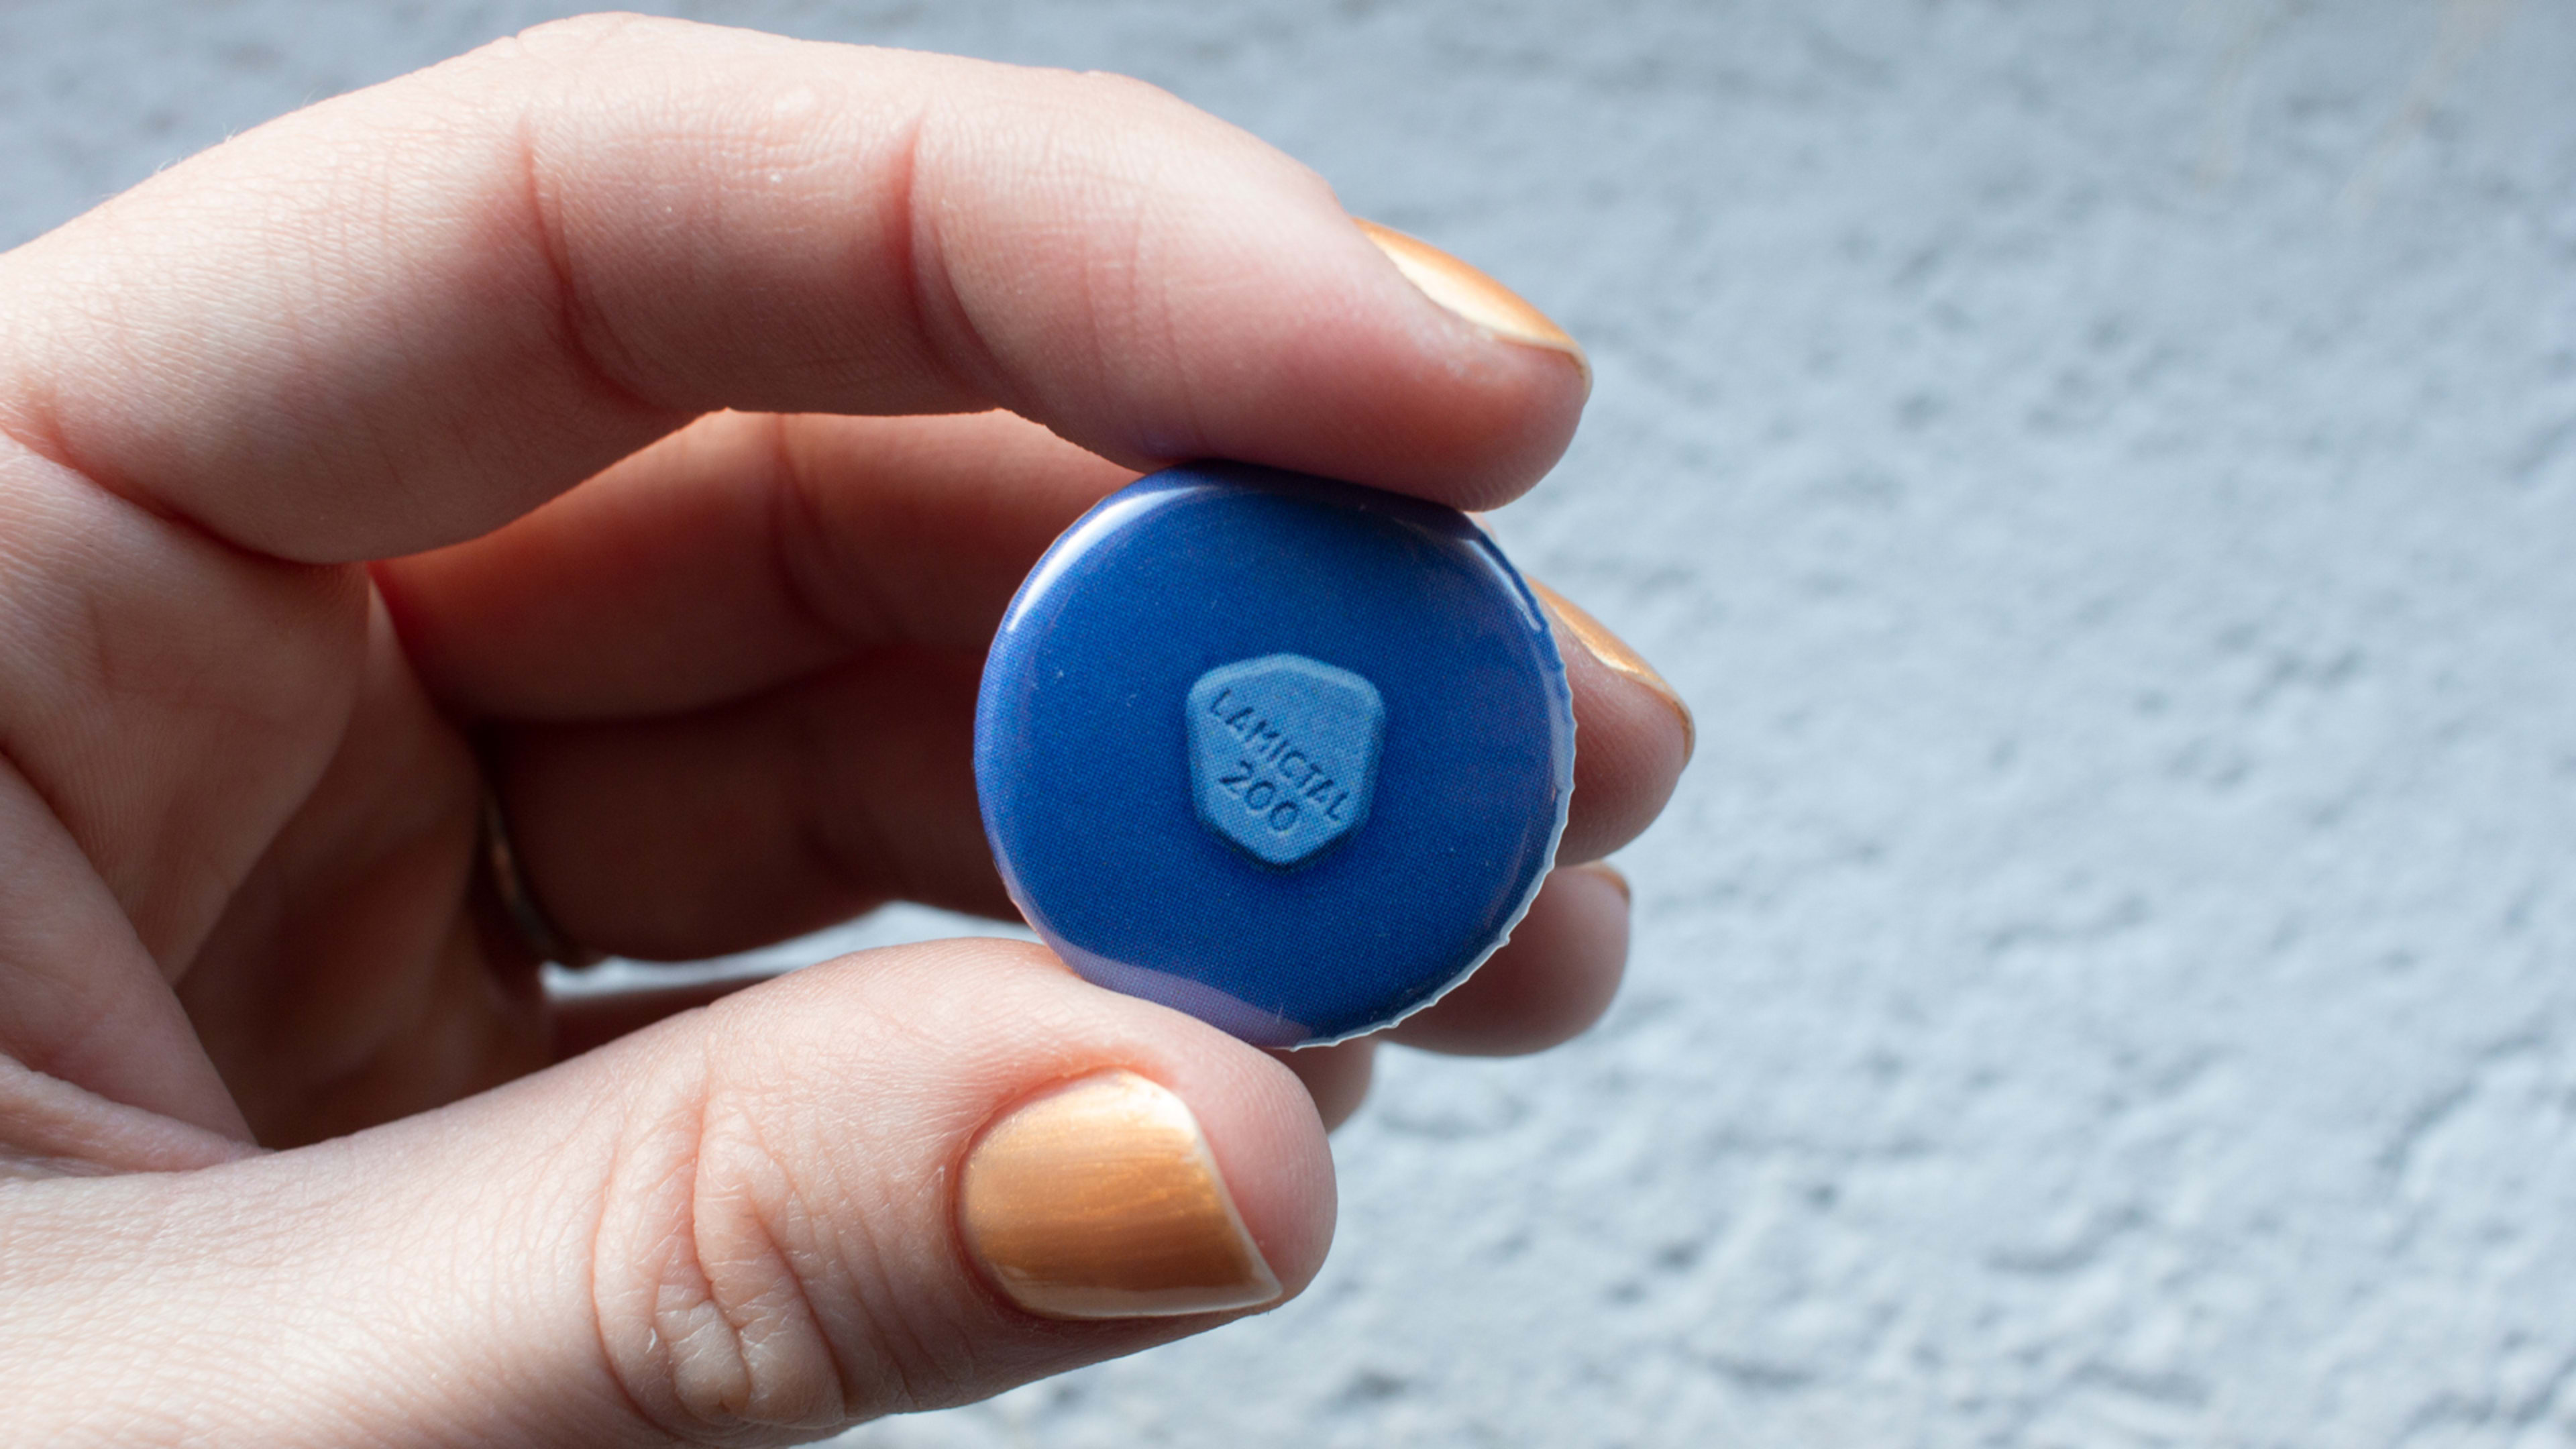 These “Wear your meds” buttons tackle the stigma of taking mental illness drugs